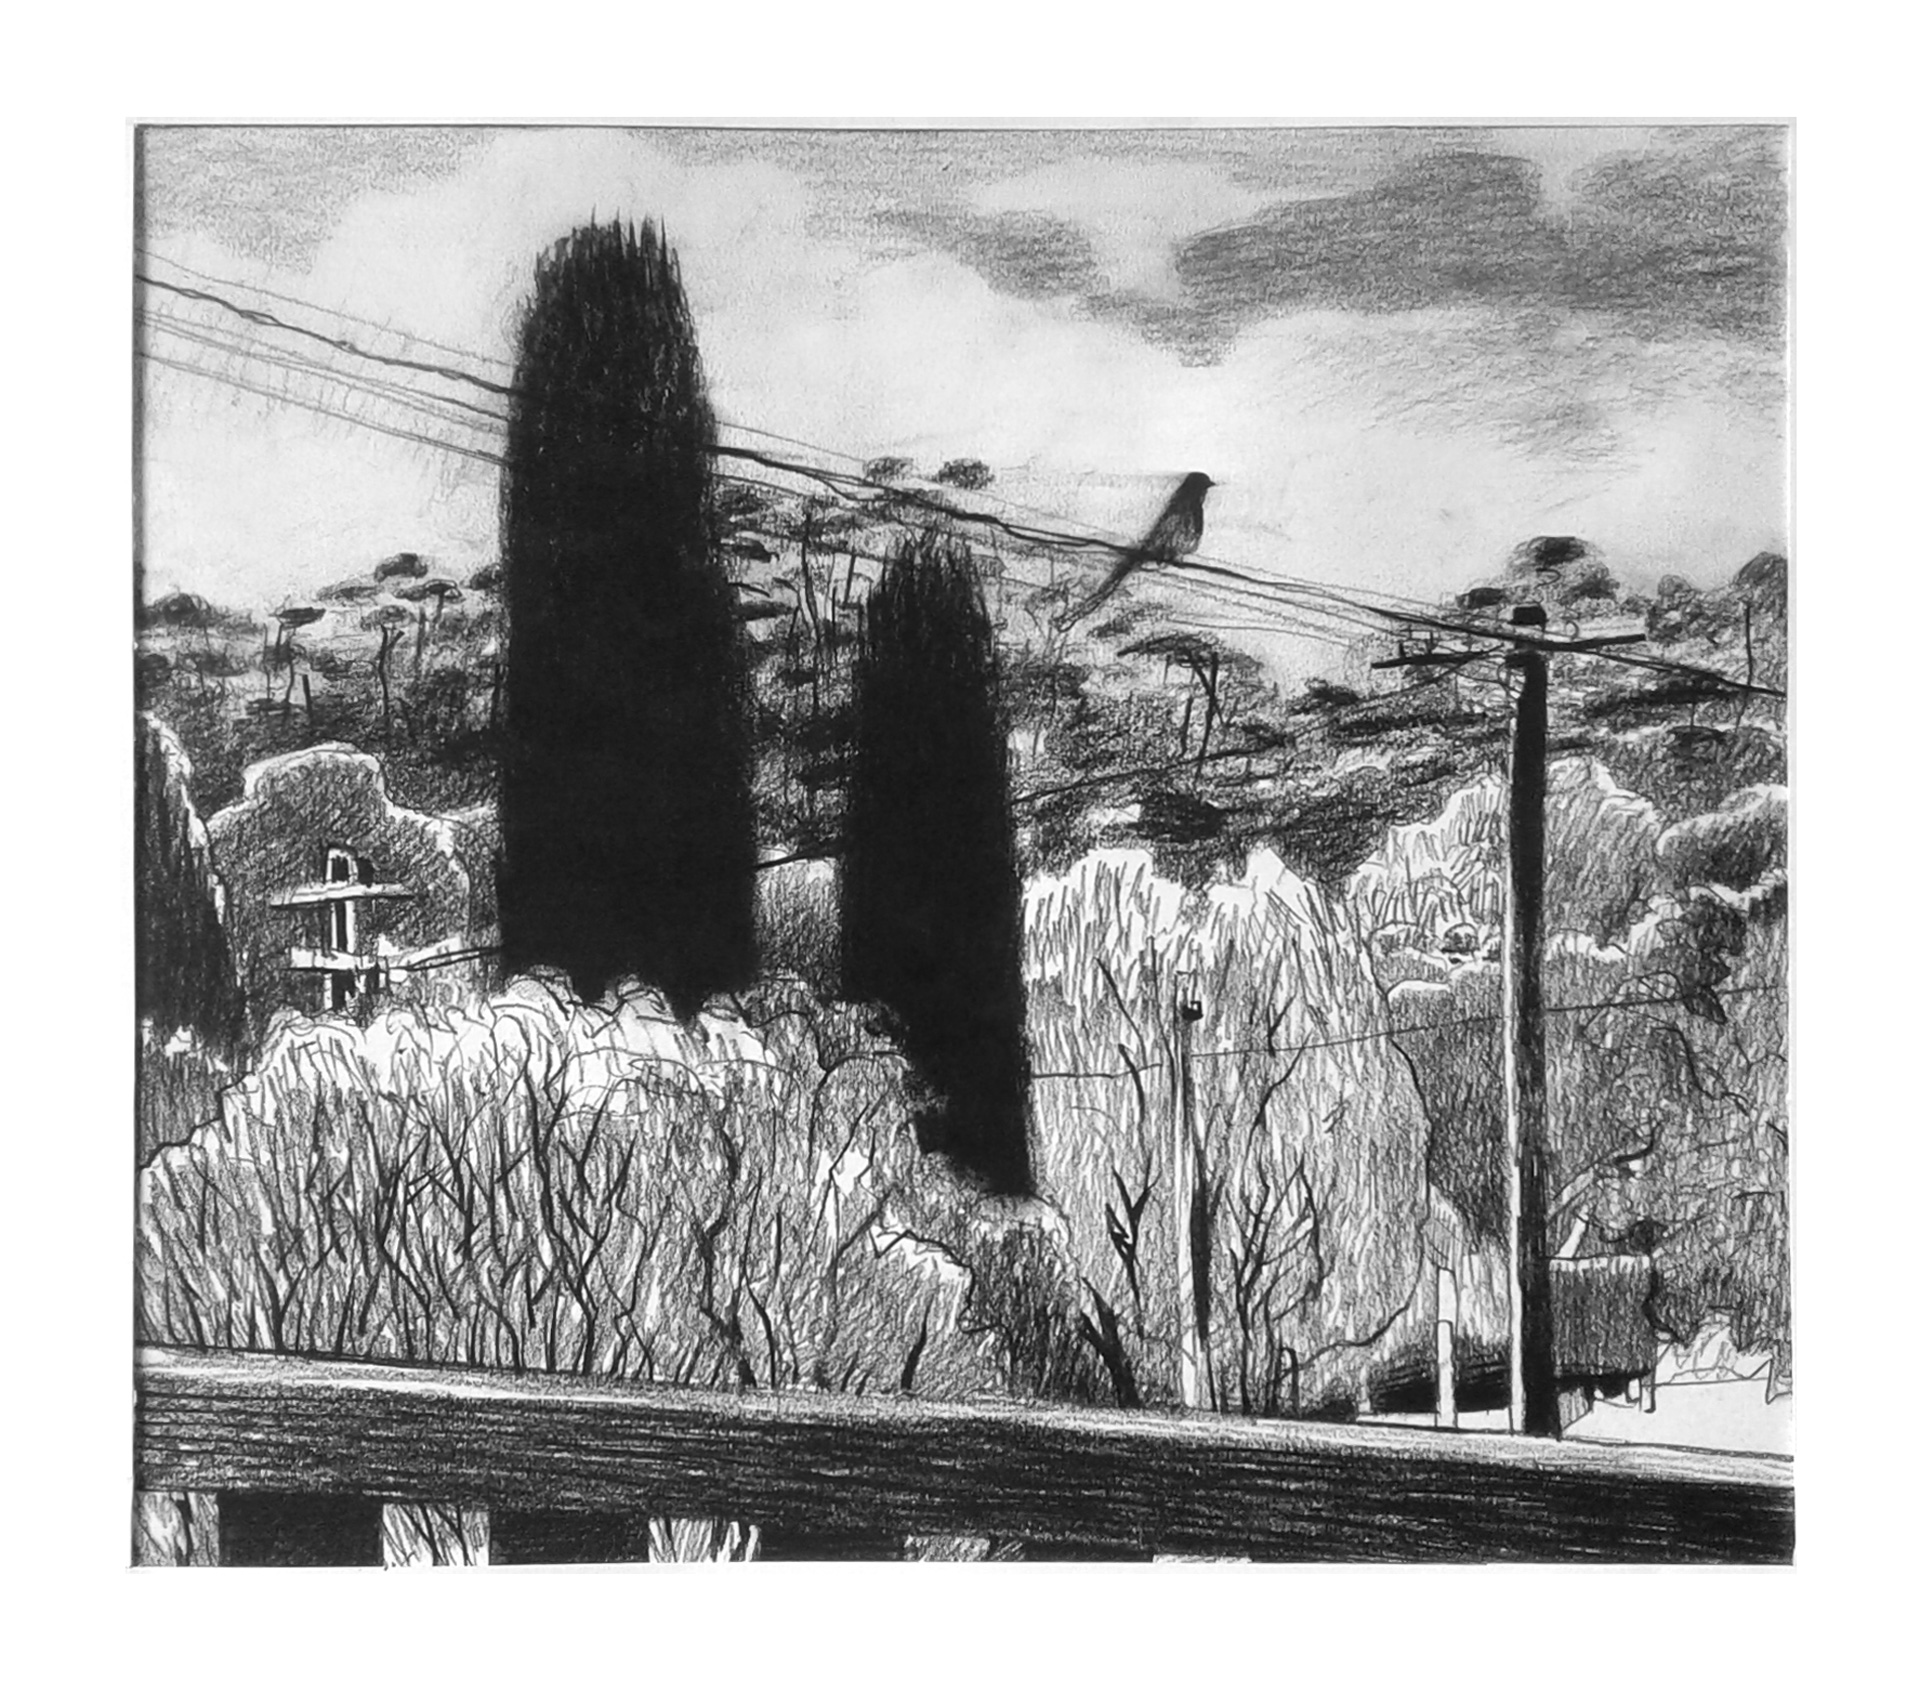 21. Ben Crappsley, View from the verandah at #5, conte pencil on paper, $470